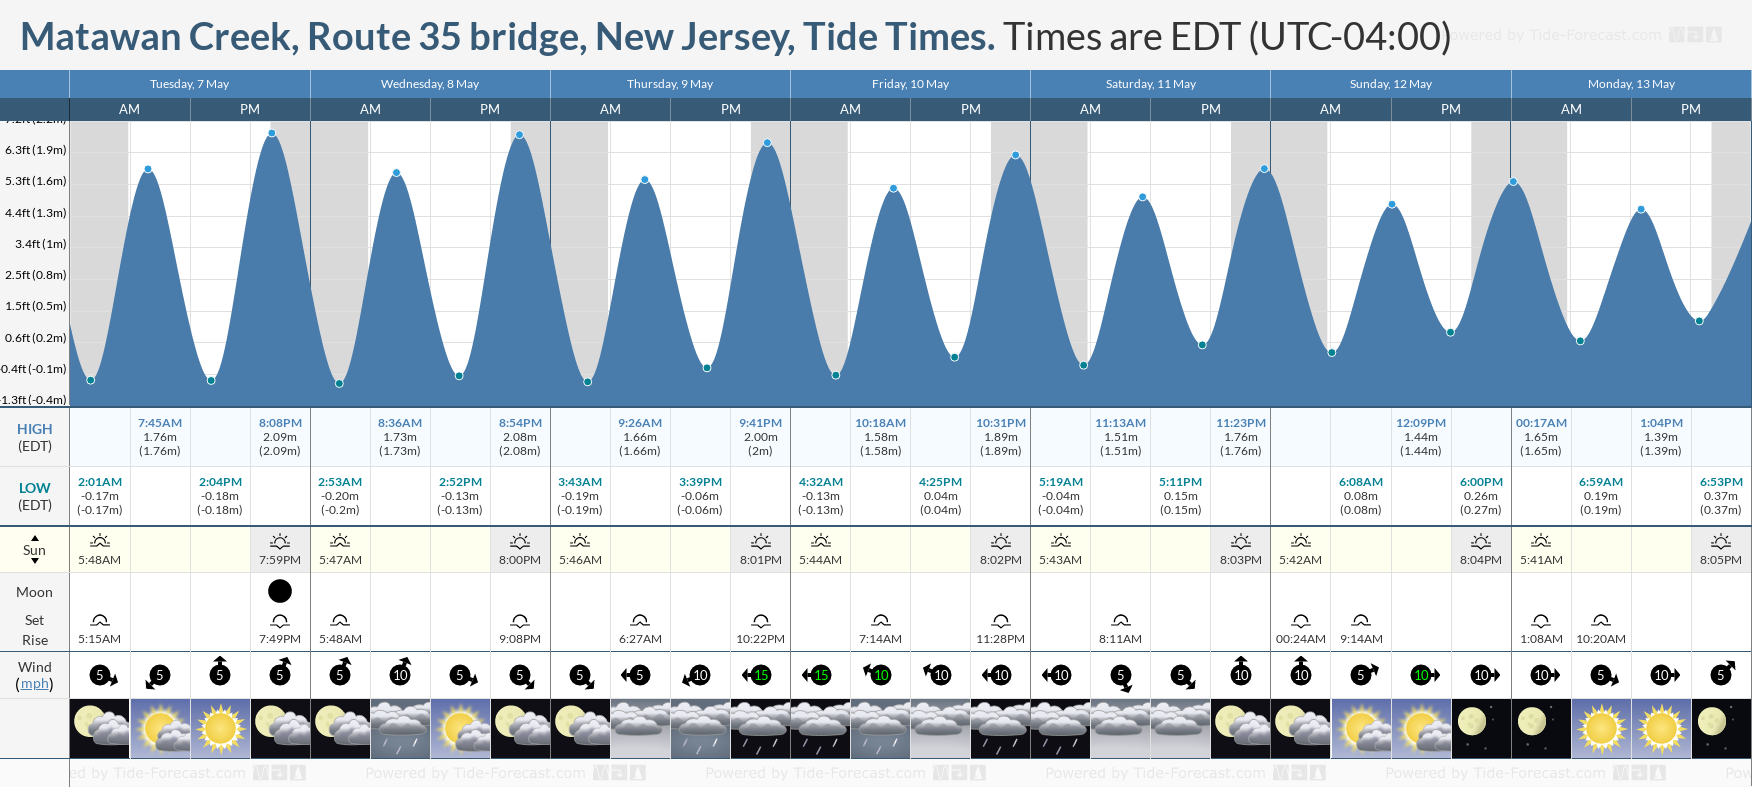 Matawan Creek, Route 35 bridge, New Jersey Tide Chart including high and low tide tide times for the next 7 days